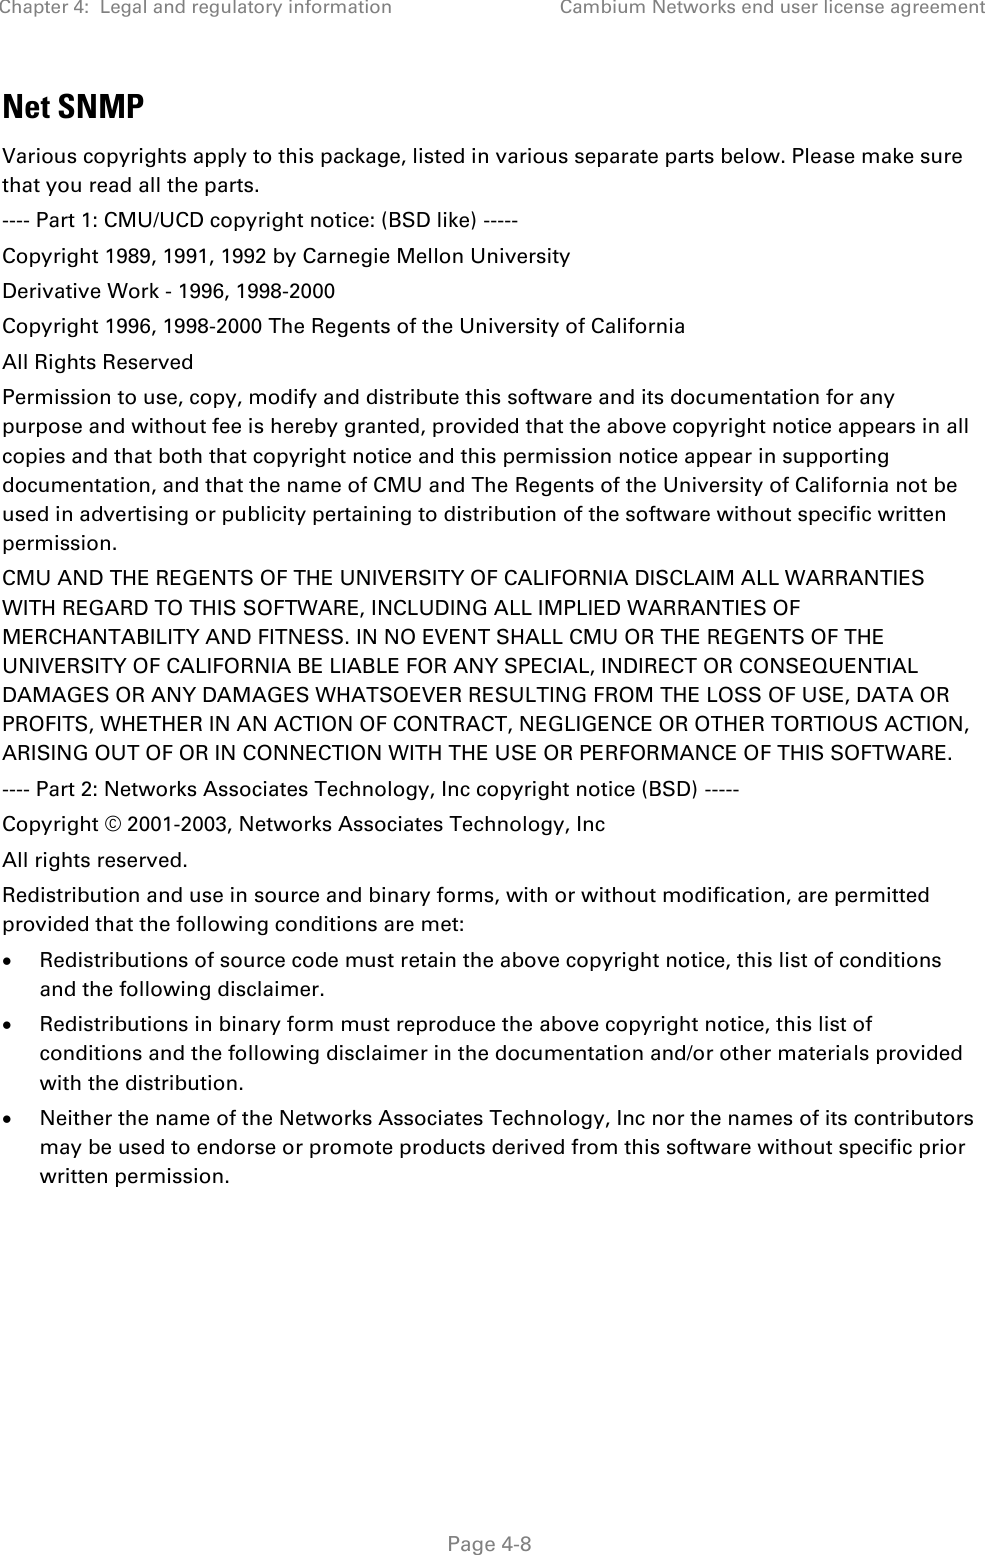 Chapter 4:  Legal and regulatory information Cambium Networks end user license agreement   Page 4-8 Net SNMP Various copyrights apply to this package, listed in various separate parts below. Please make sure that you read all the parts. ---- Part 1: CMU/UCD copyright notice: (BSD like) ----- Copyright 1989, 1991, 1992 by Carnegie Mellon University Derivative Work - 1996, 1998-2000 Copyright 1996, 1998-2000 The Regents of the University of California All Rights Reserved Permission to use, copy, modify and distribute this software and its documentation for any purpose and without fee is hereby granted, provided that the above copyright notice appears in all copies and that both that copyright notice and this permission notice appear in supporting documentation, and that the name of CMU and The Regents of the University of California not be used in advertising or publicity pertaining to distribution of the software without specific written permission. CMU AND THE REGENTS OF THE UNIVERSITY OF CALIFORNIA DISCLAIM ALL WARRANTIES WITH REGARD TO THIS SOFTWARE, INCLUDING ALL IMPLIED WARRANTIES OF MERCHANTABILITY AND FITNESS. IN NO EVENT SHALL CMU OR THE REGENTS OF THE UNIVERSITY OF CALIFORNIA BE LIABLE FOR ANY SPECIAL, INDIRECT OR CONSEQUENTIAL DAMAGES OR ANY DAMAGES WHATSOEVER RESULTING FROM THE LOSS OF USE, DATA OR PROFITS, WHETHER IN AN ACTION OF CONTRACT, NEGLIGENCE OR OTHER TORTIOUS ACTION, ARISING OUT OF OR IN CONNECTION WITH THE USE OR PERFORMANCE OF THIS SOFTWARE. ---- Part 2: Networks Associates Technology, Inc copyright notice (BSD) ----- Copyright © 2001-2003, Networks Associates Technology, Inc All rights reserved. Redistribution and use in source and binary forms, with or without modification, are permitted provided that the following conditions are met:  Redistributions of source code must retain the above copyright notice, this list of conditions and the following disclaimer.  Redistributions in binary form must reproduce the above copyright notice, this list of conditions and the following disclaimer in the documentation and/or other materials provided with the distribution.  Neither the name of the Networks Associates Technology, Inc nor the names of its contributors may be used to endorse or promote products derived from this software without specific prior written permission. 